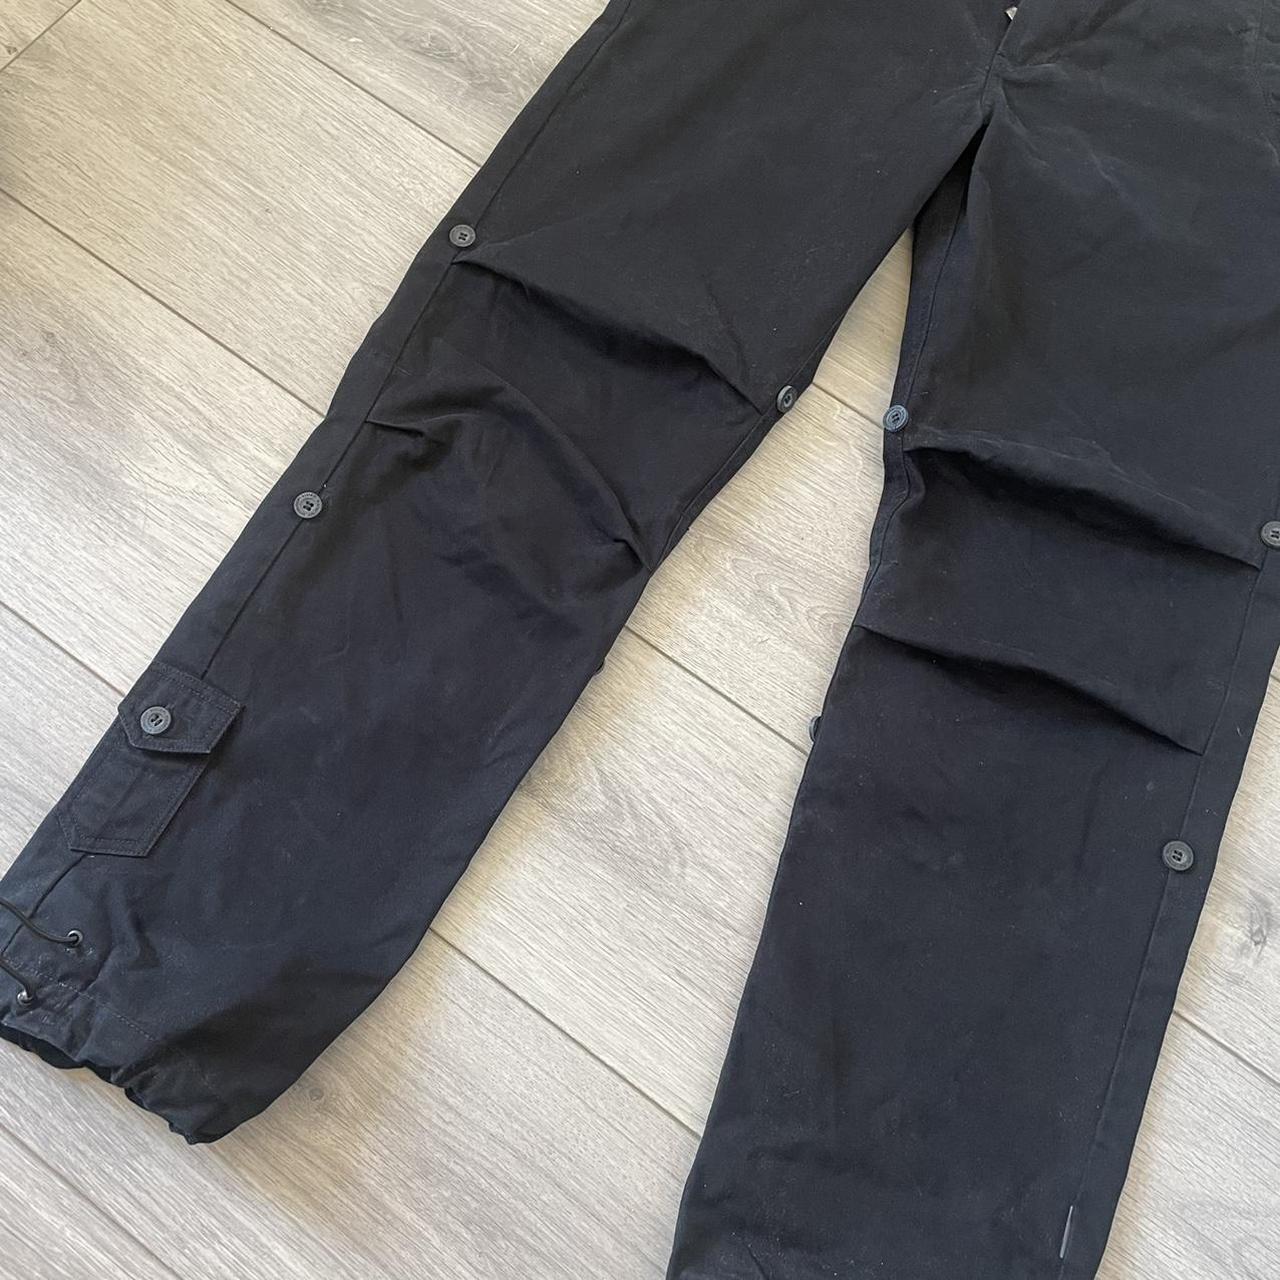 Maharishi cargo trousers. Selling as they are a tad... - Depop